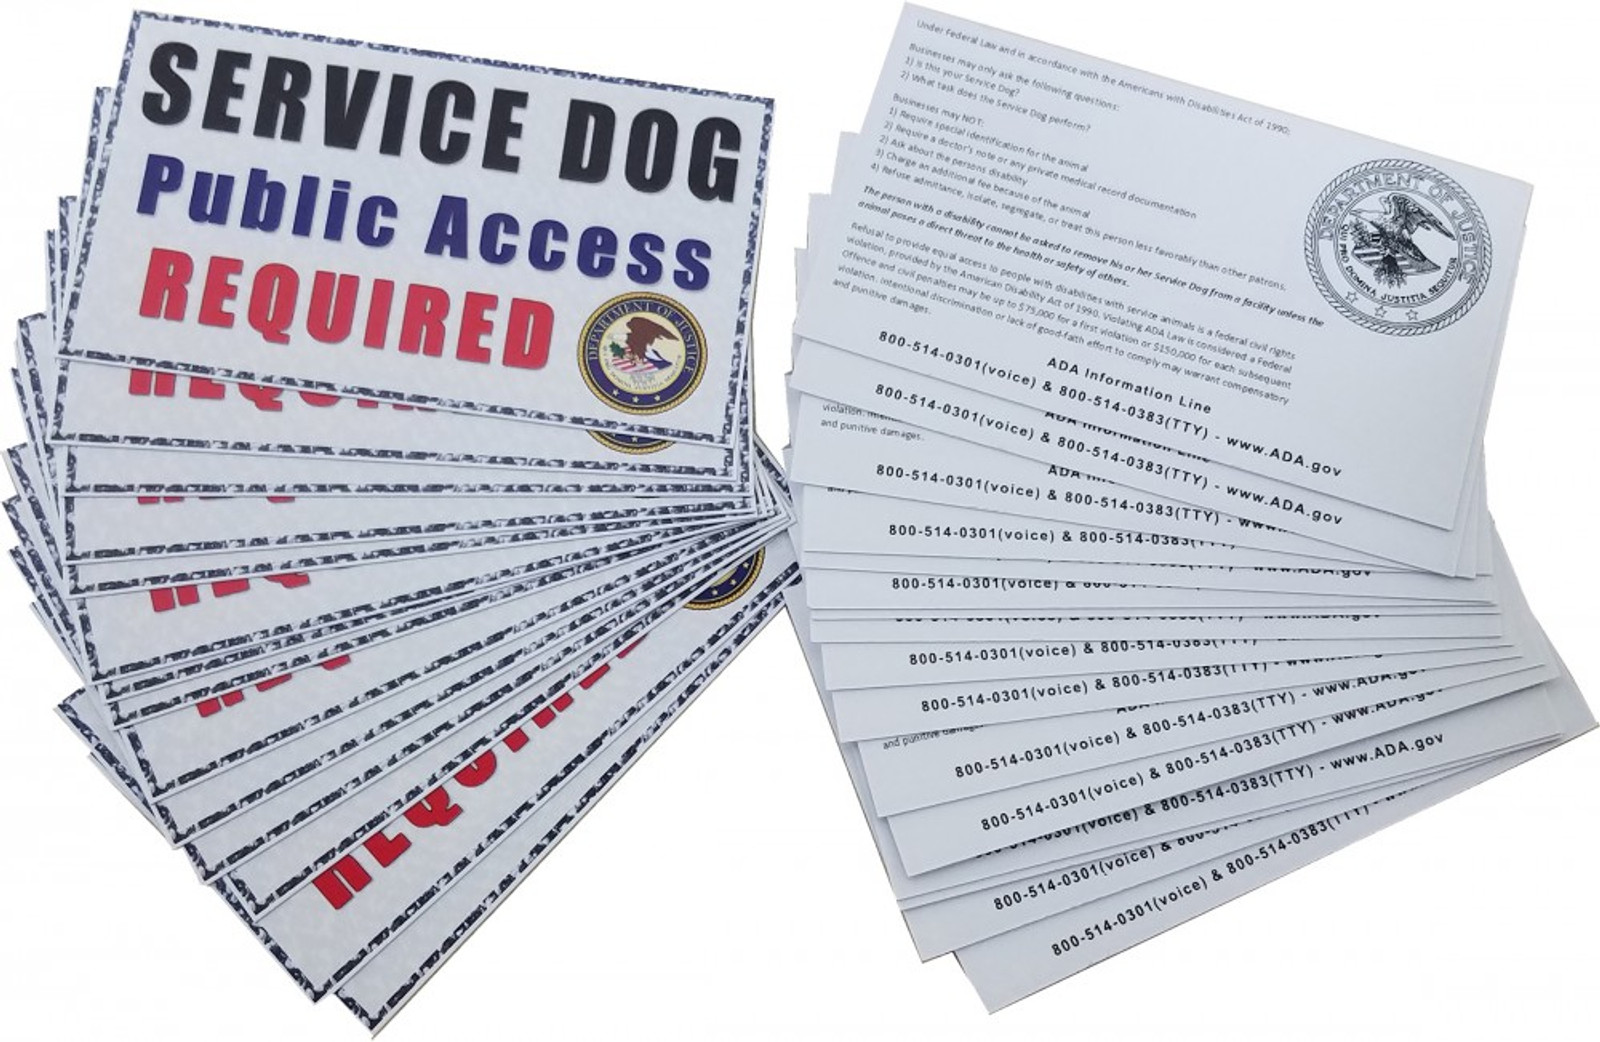 are stores allowed to ask for service dog papers